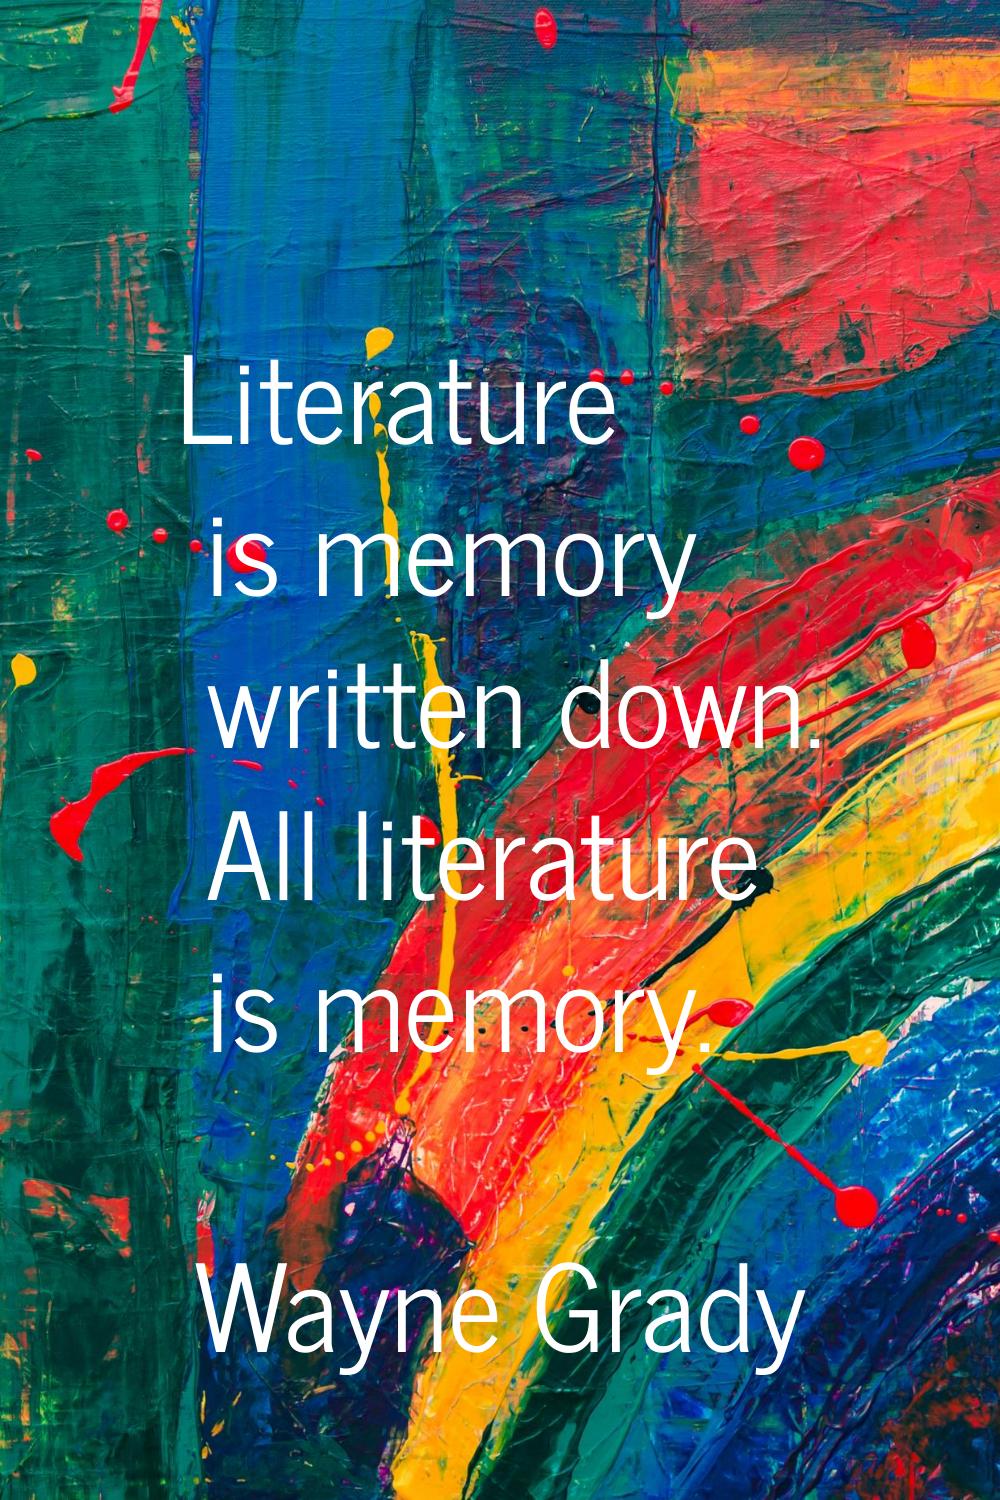 Literature is memory written down. All literature is memory.